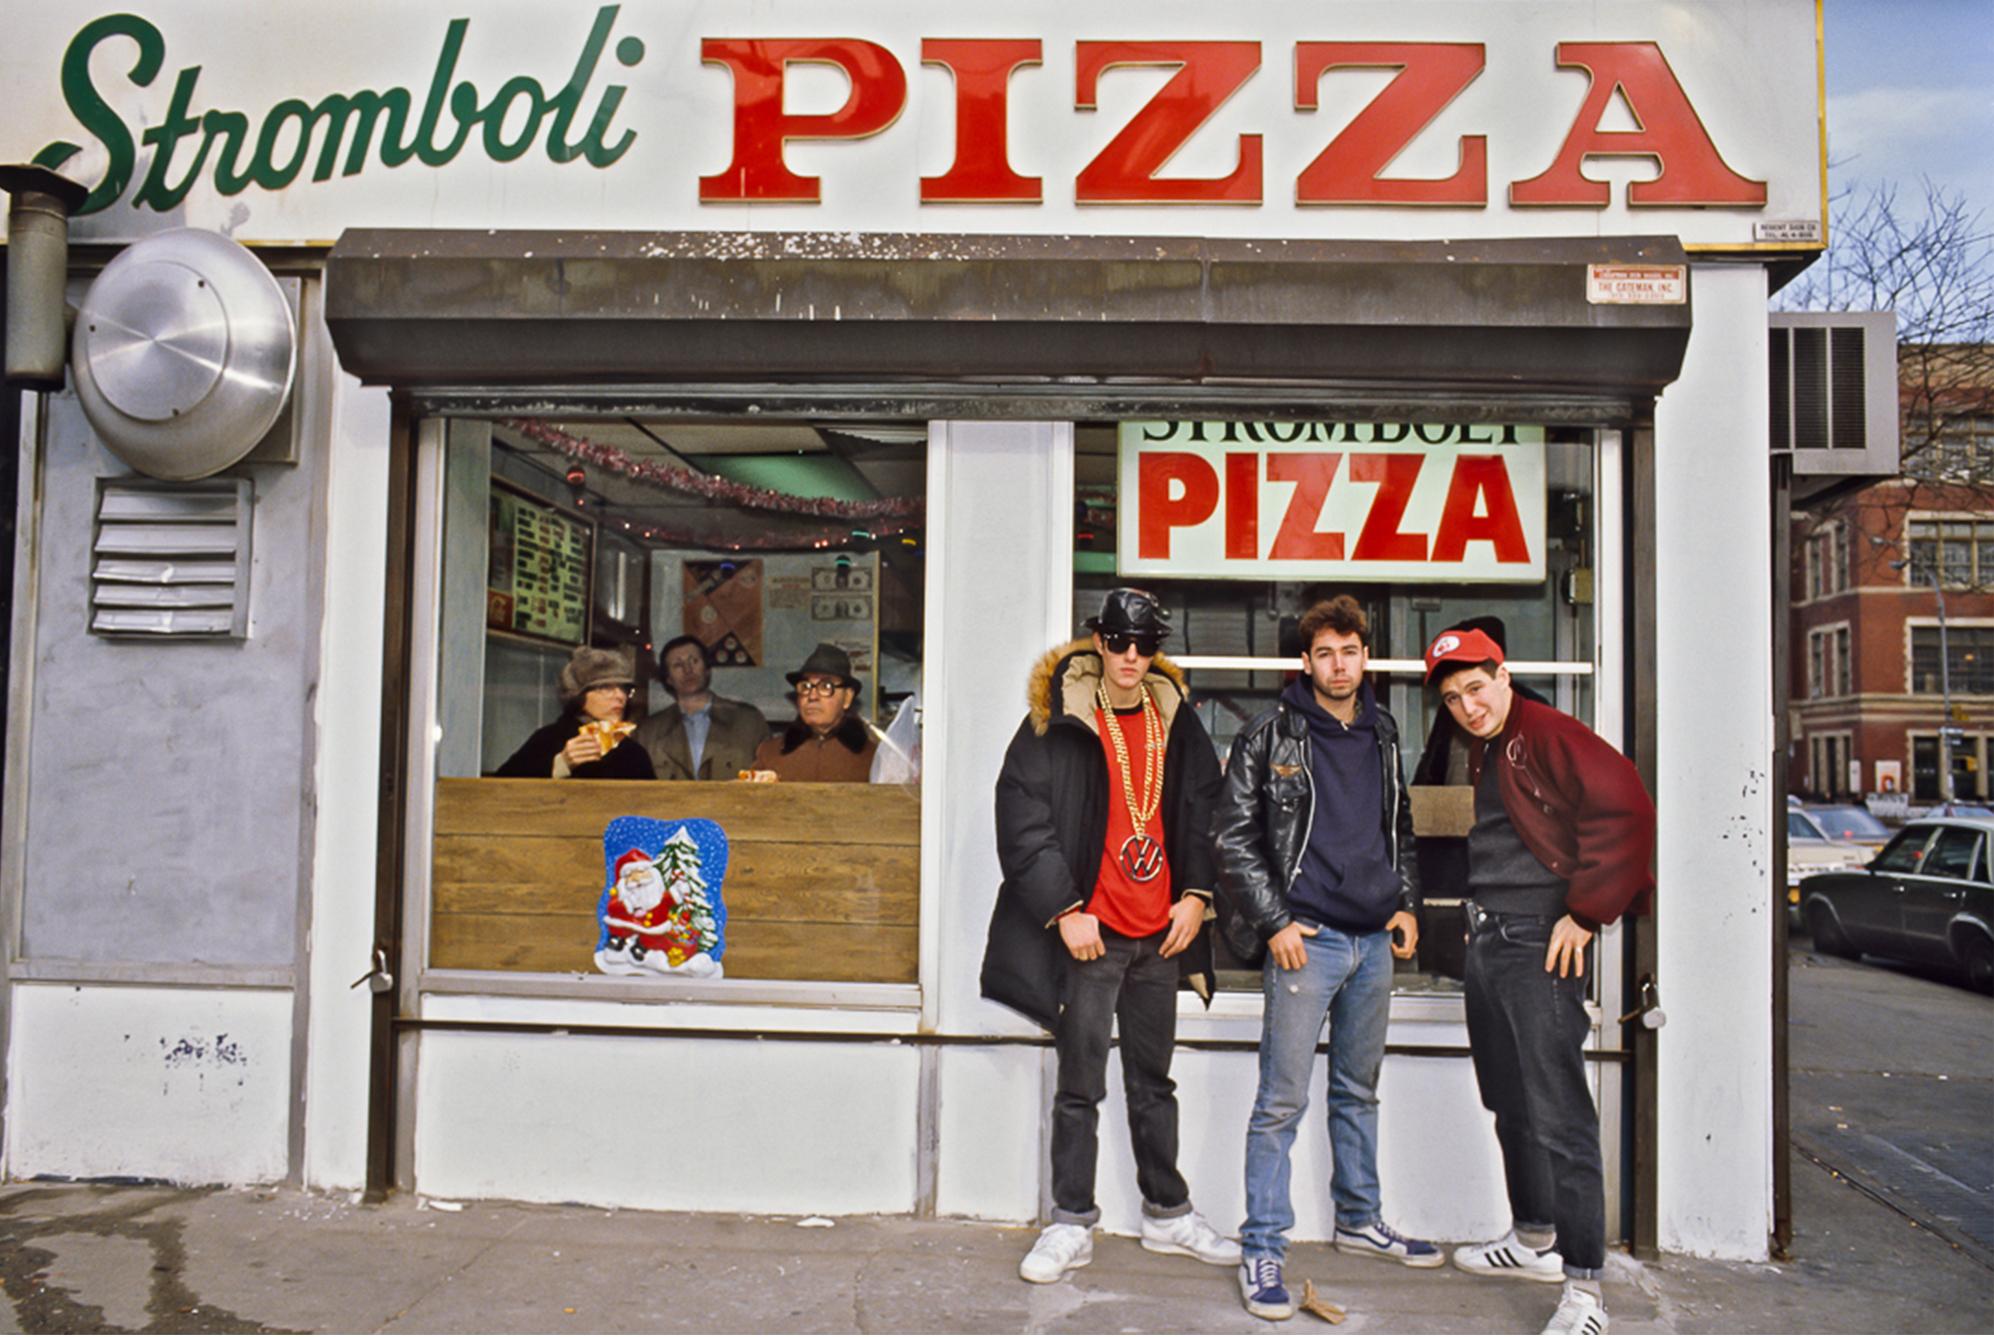 Signed limited edition 20x24"" print of The Beastie Boys, Stromboli Pizza by Lynn Goldsmith, shot in NYC in 1987.

Limited edition number 7/20

Modern C-type print. Available for immediate shipping.